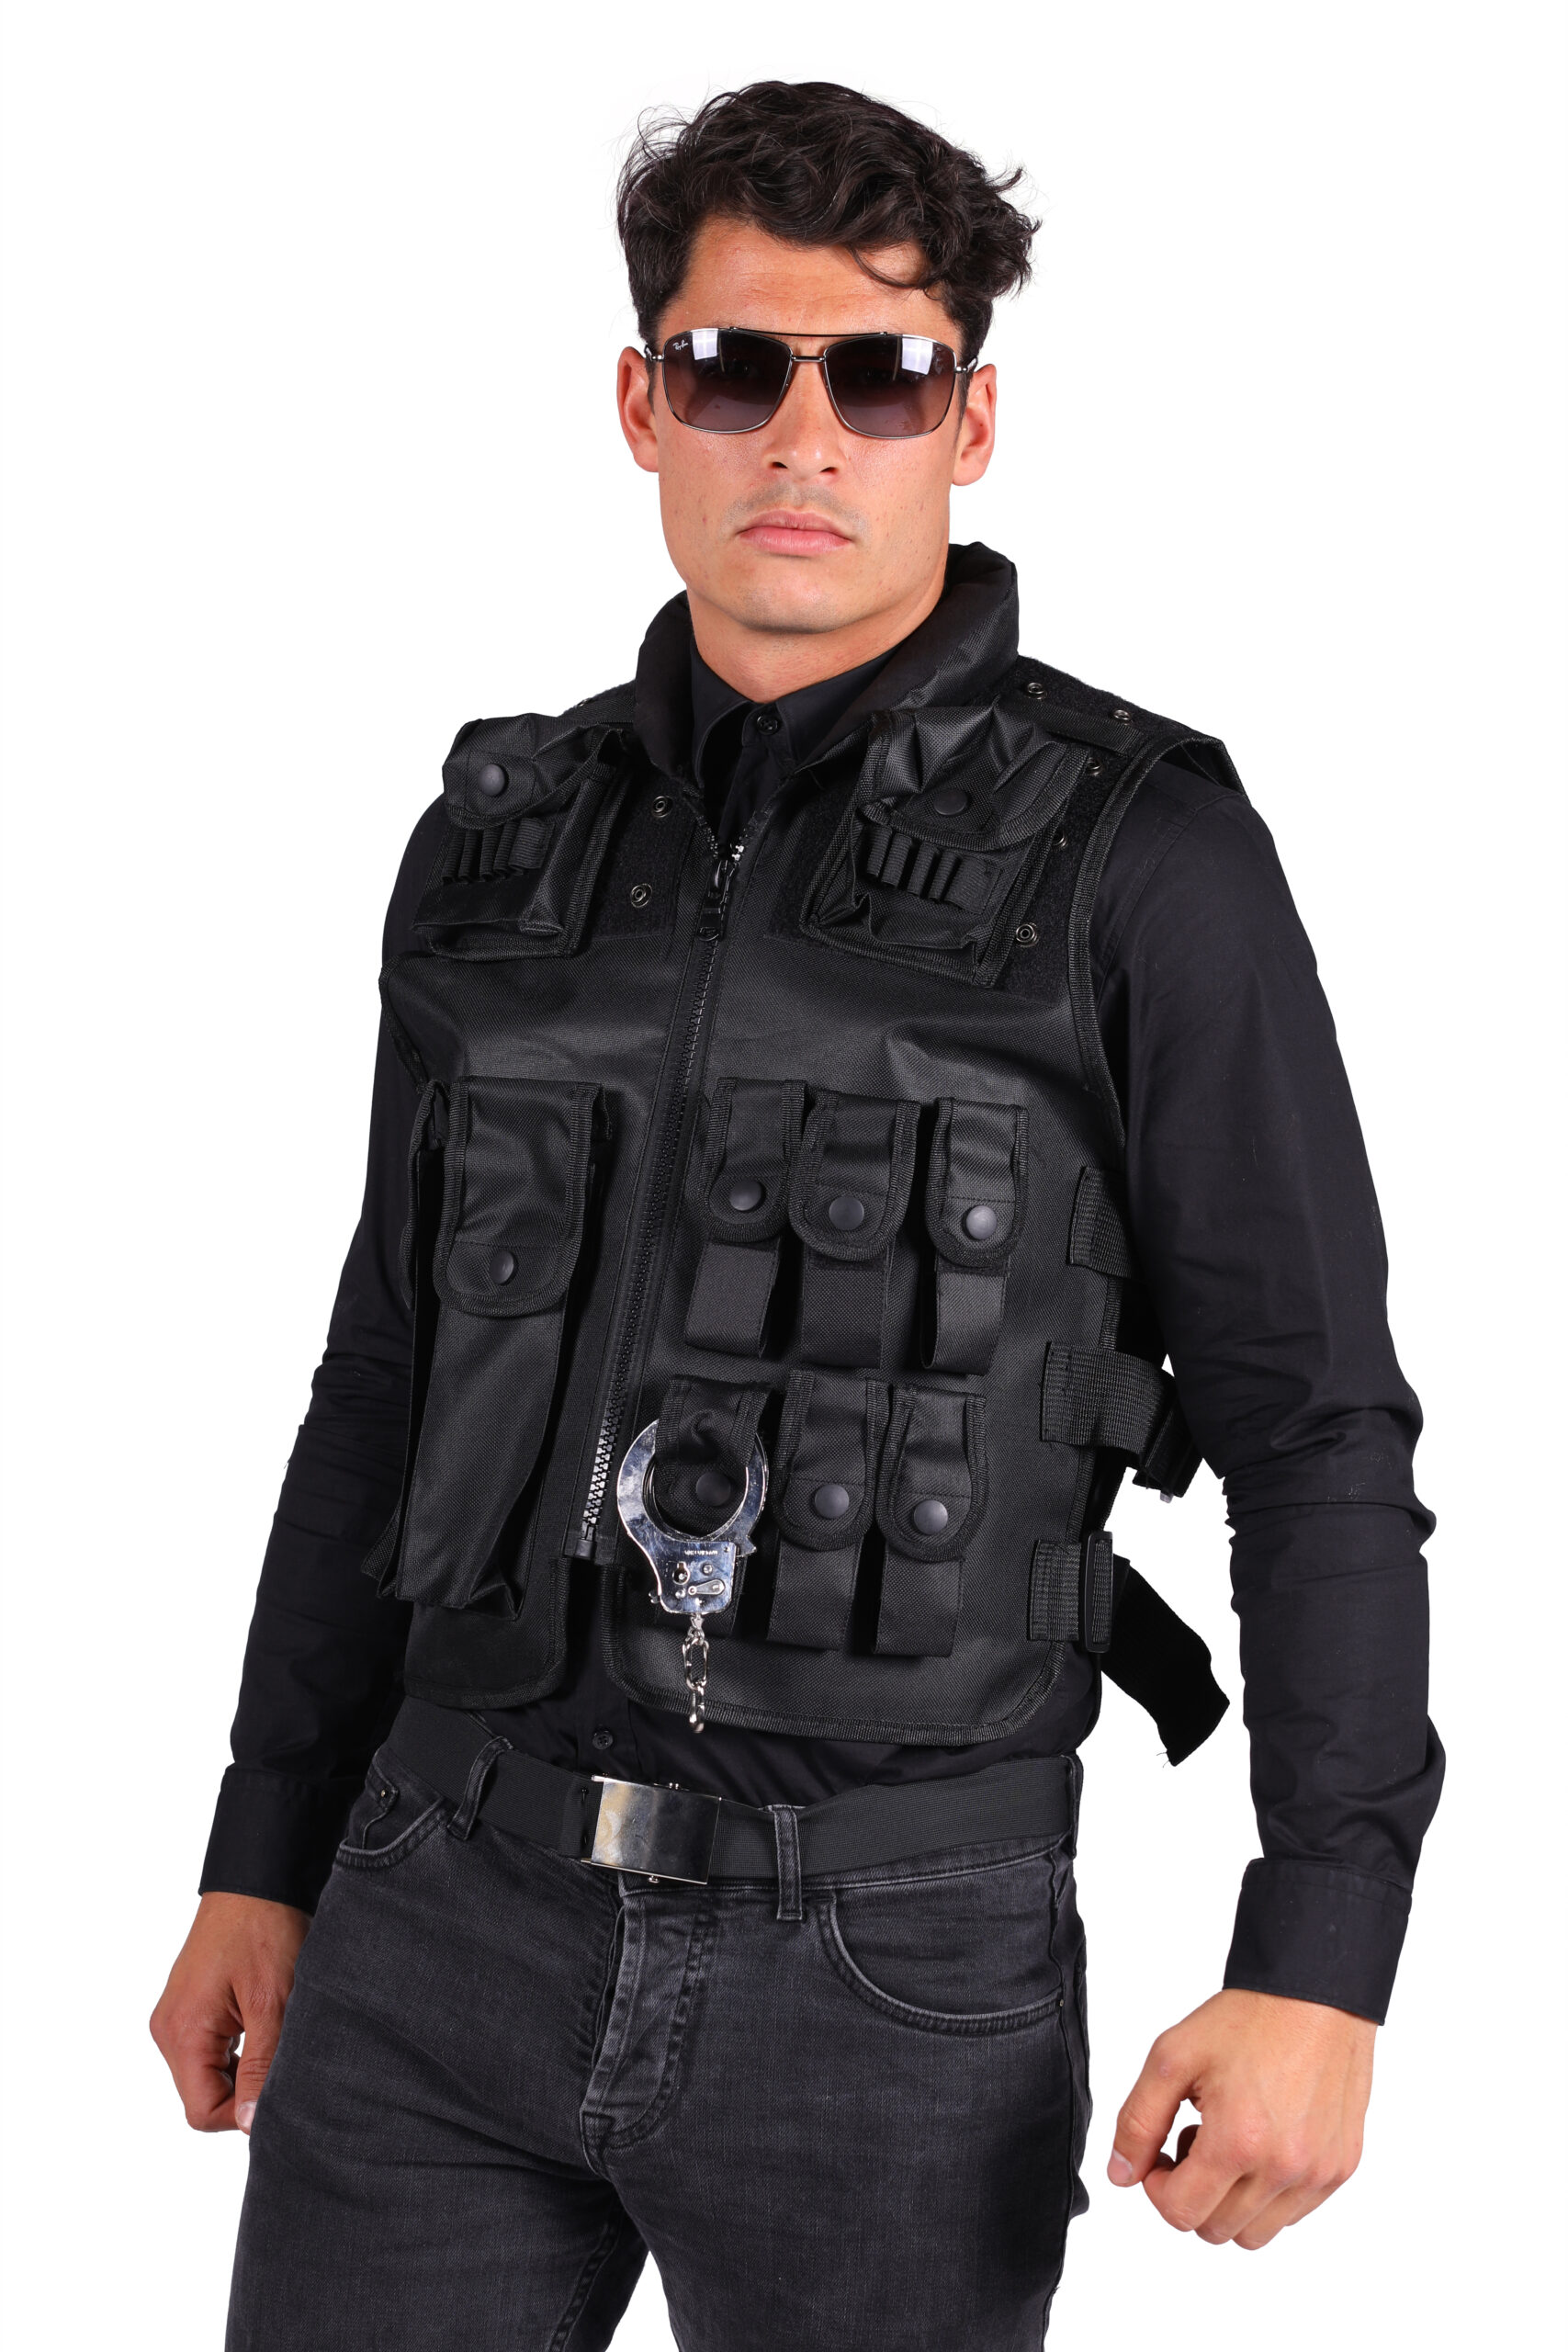 SWAT Special police